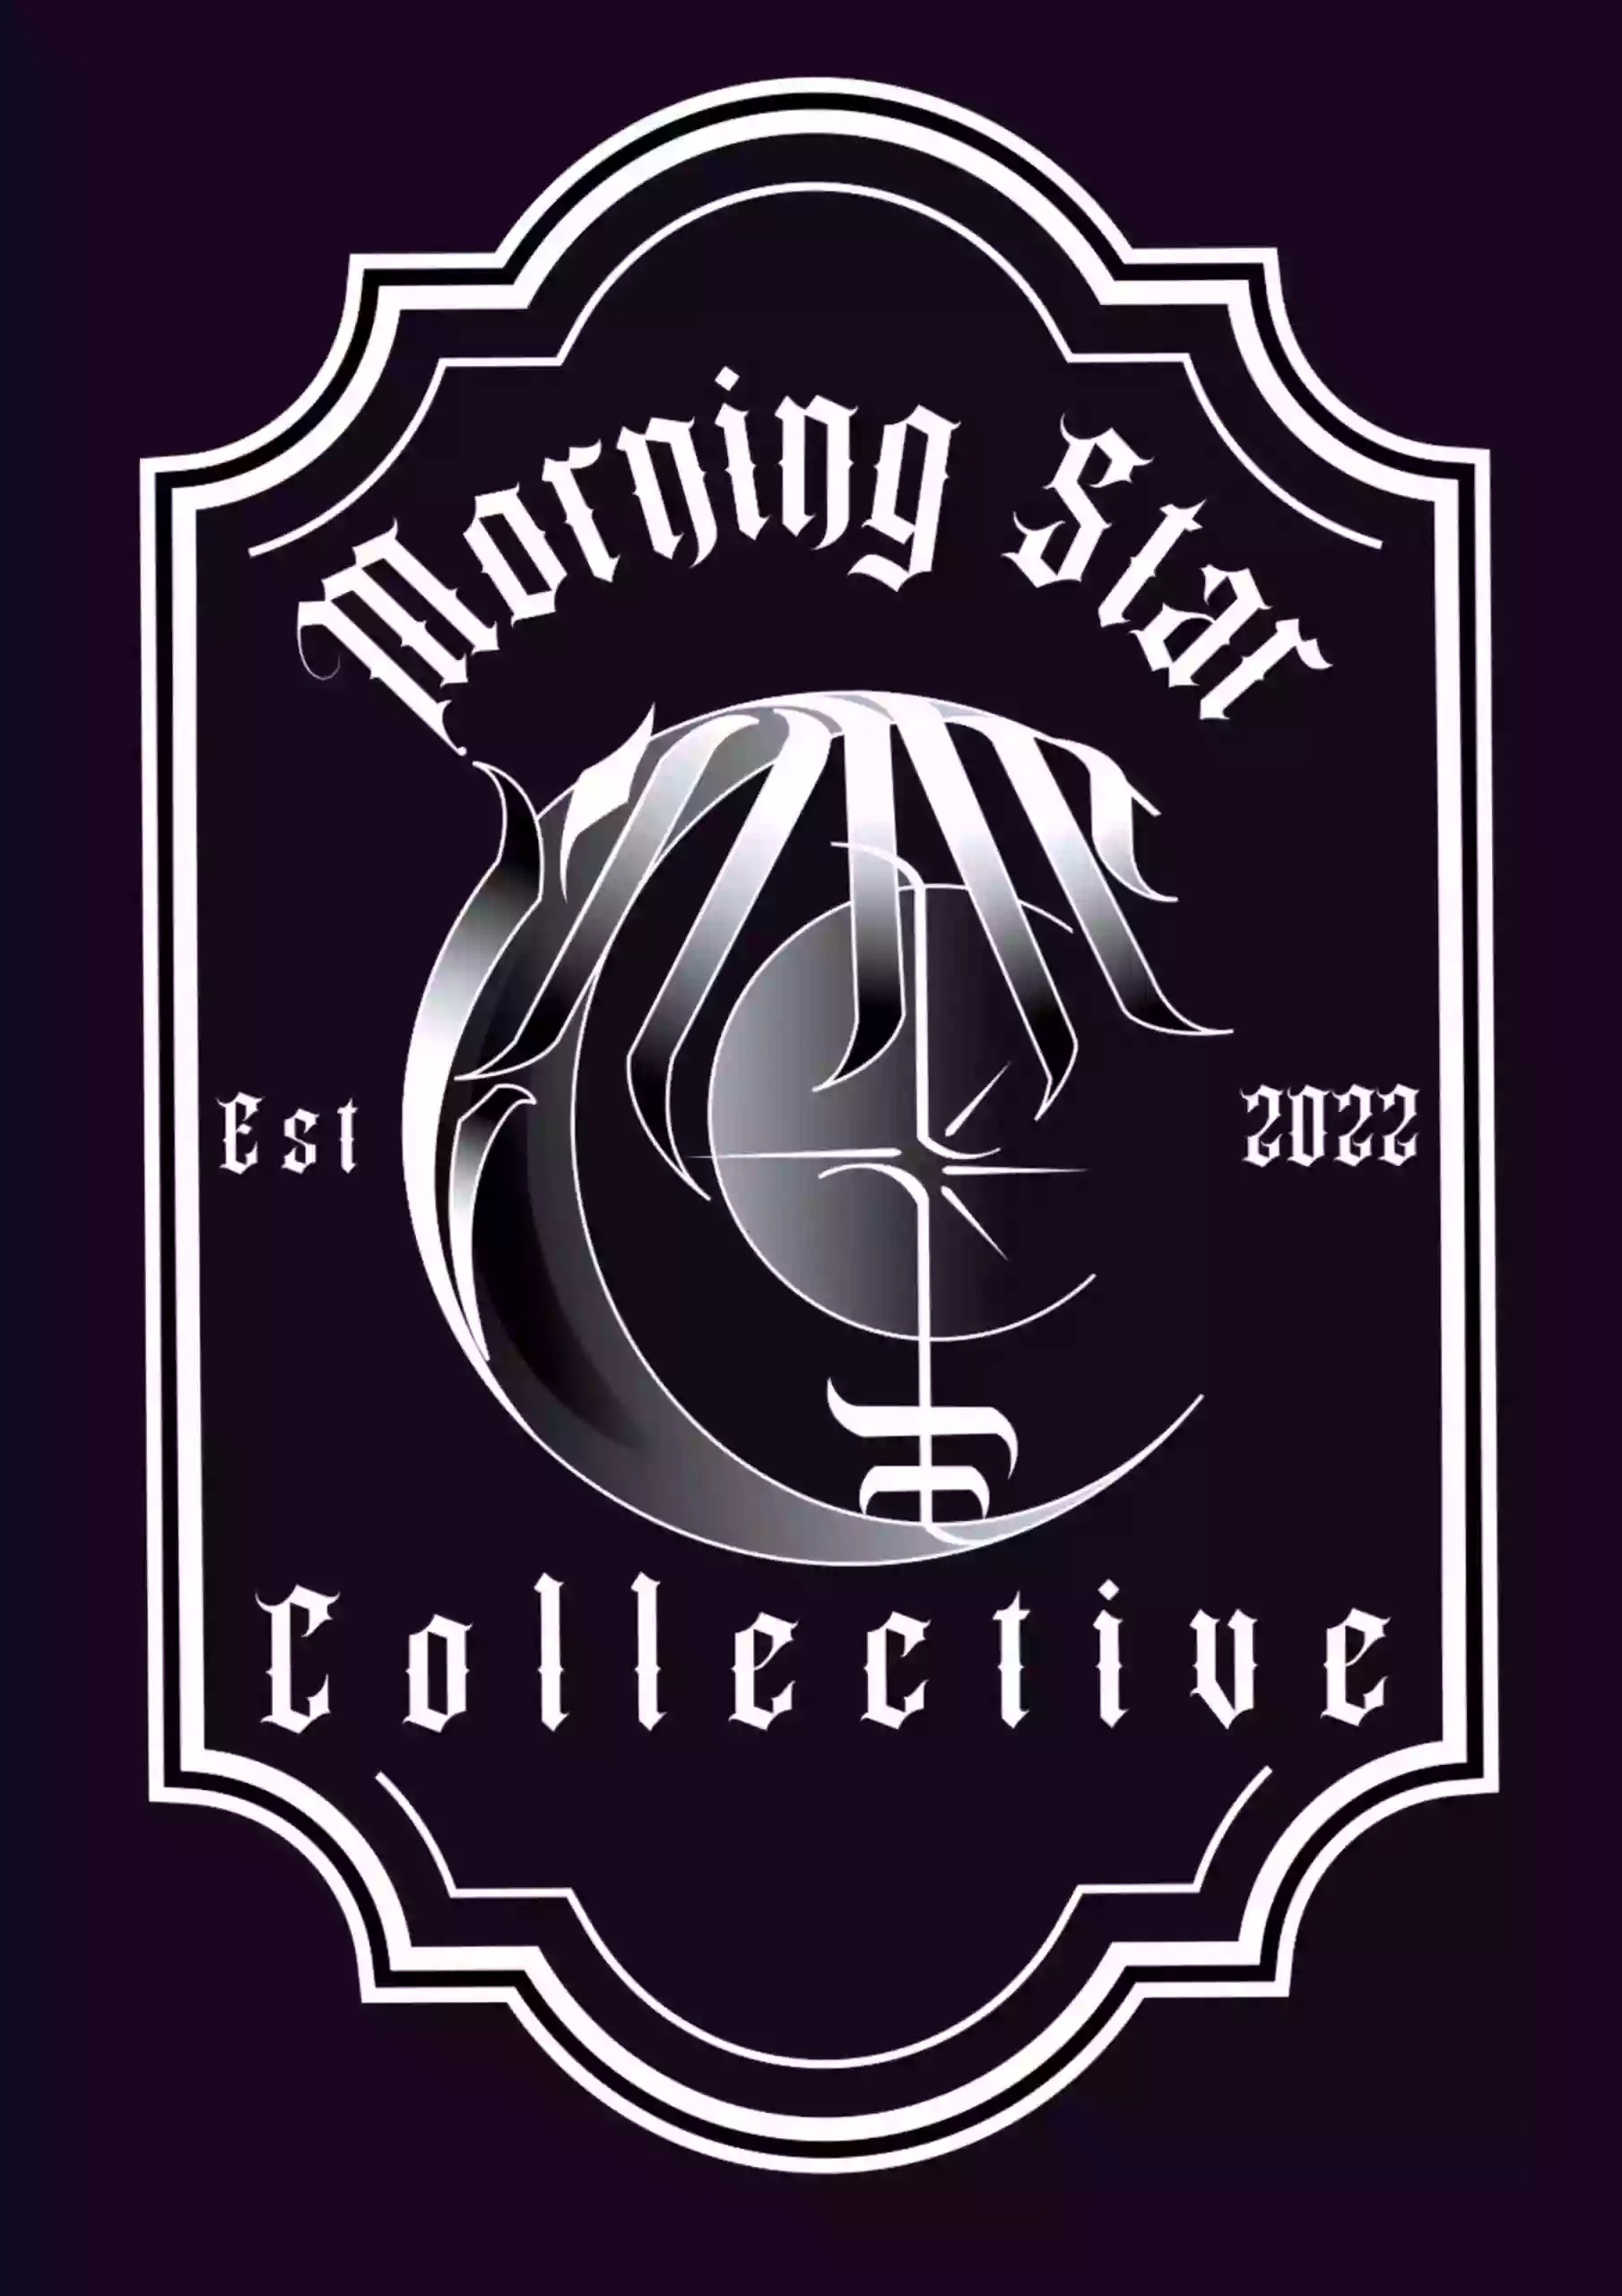 Morning Star Collective